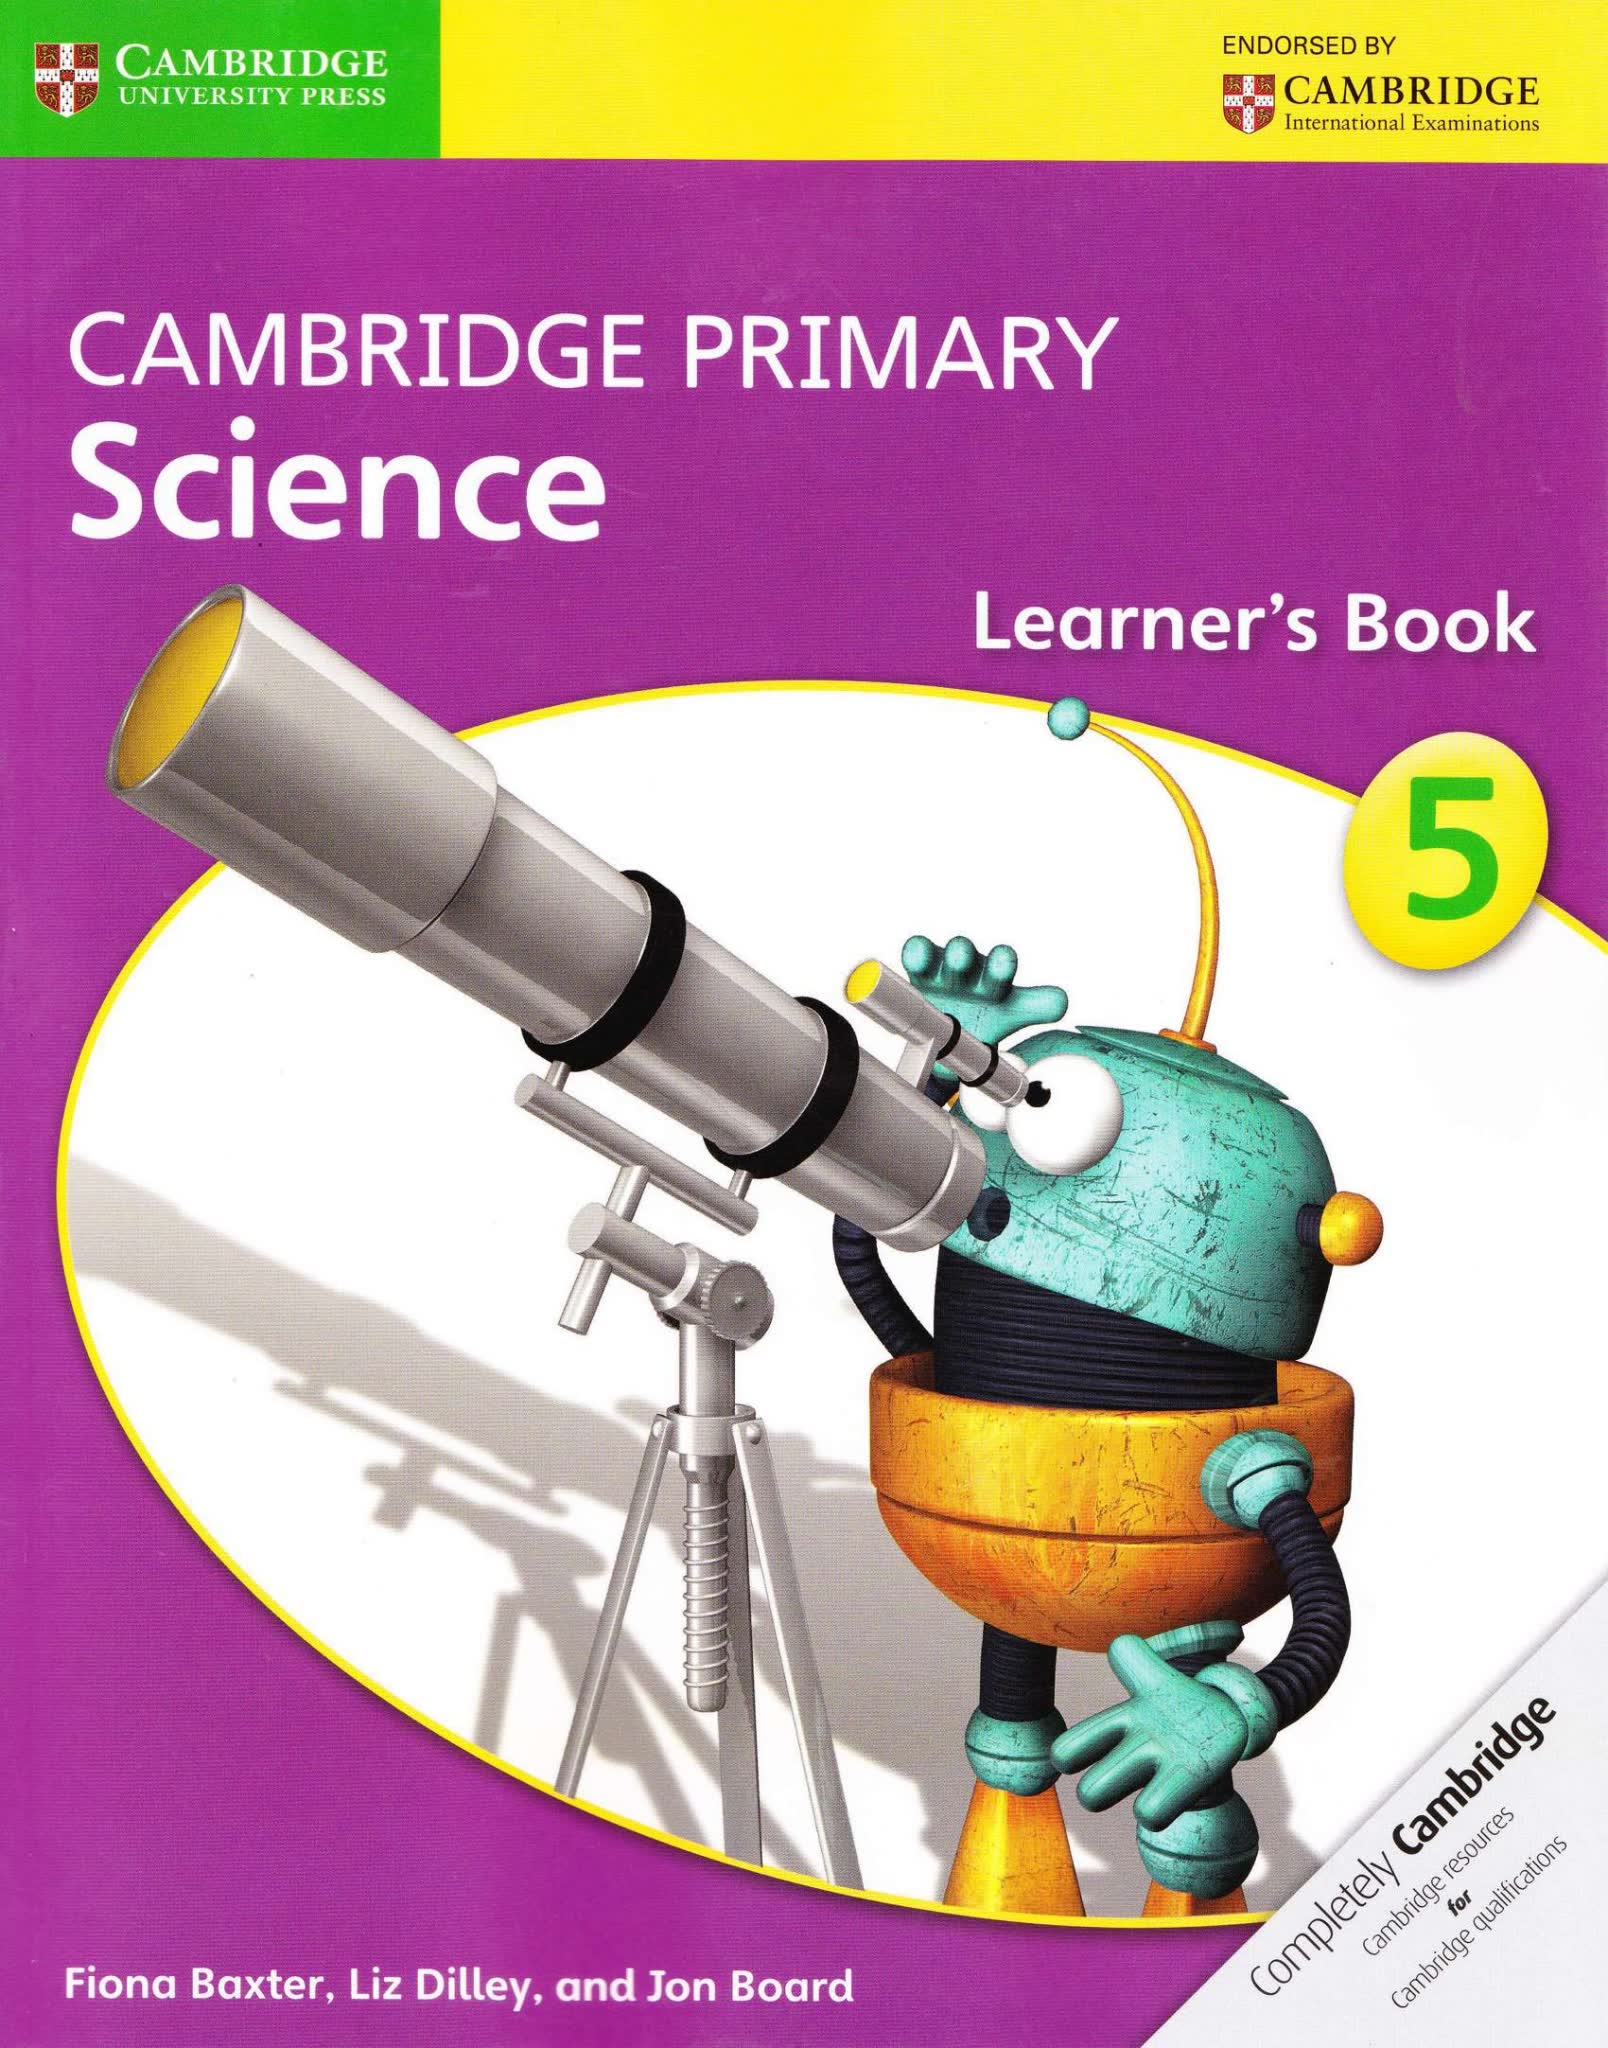 Cambridge-Primary-Science-1-Learners-Book0000